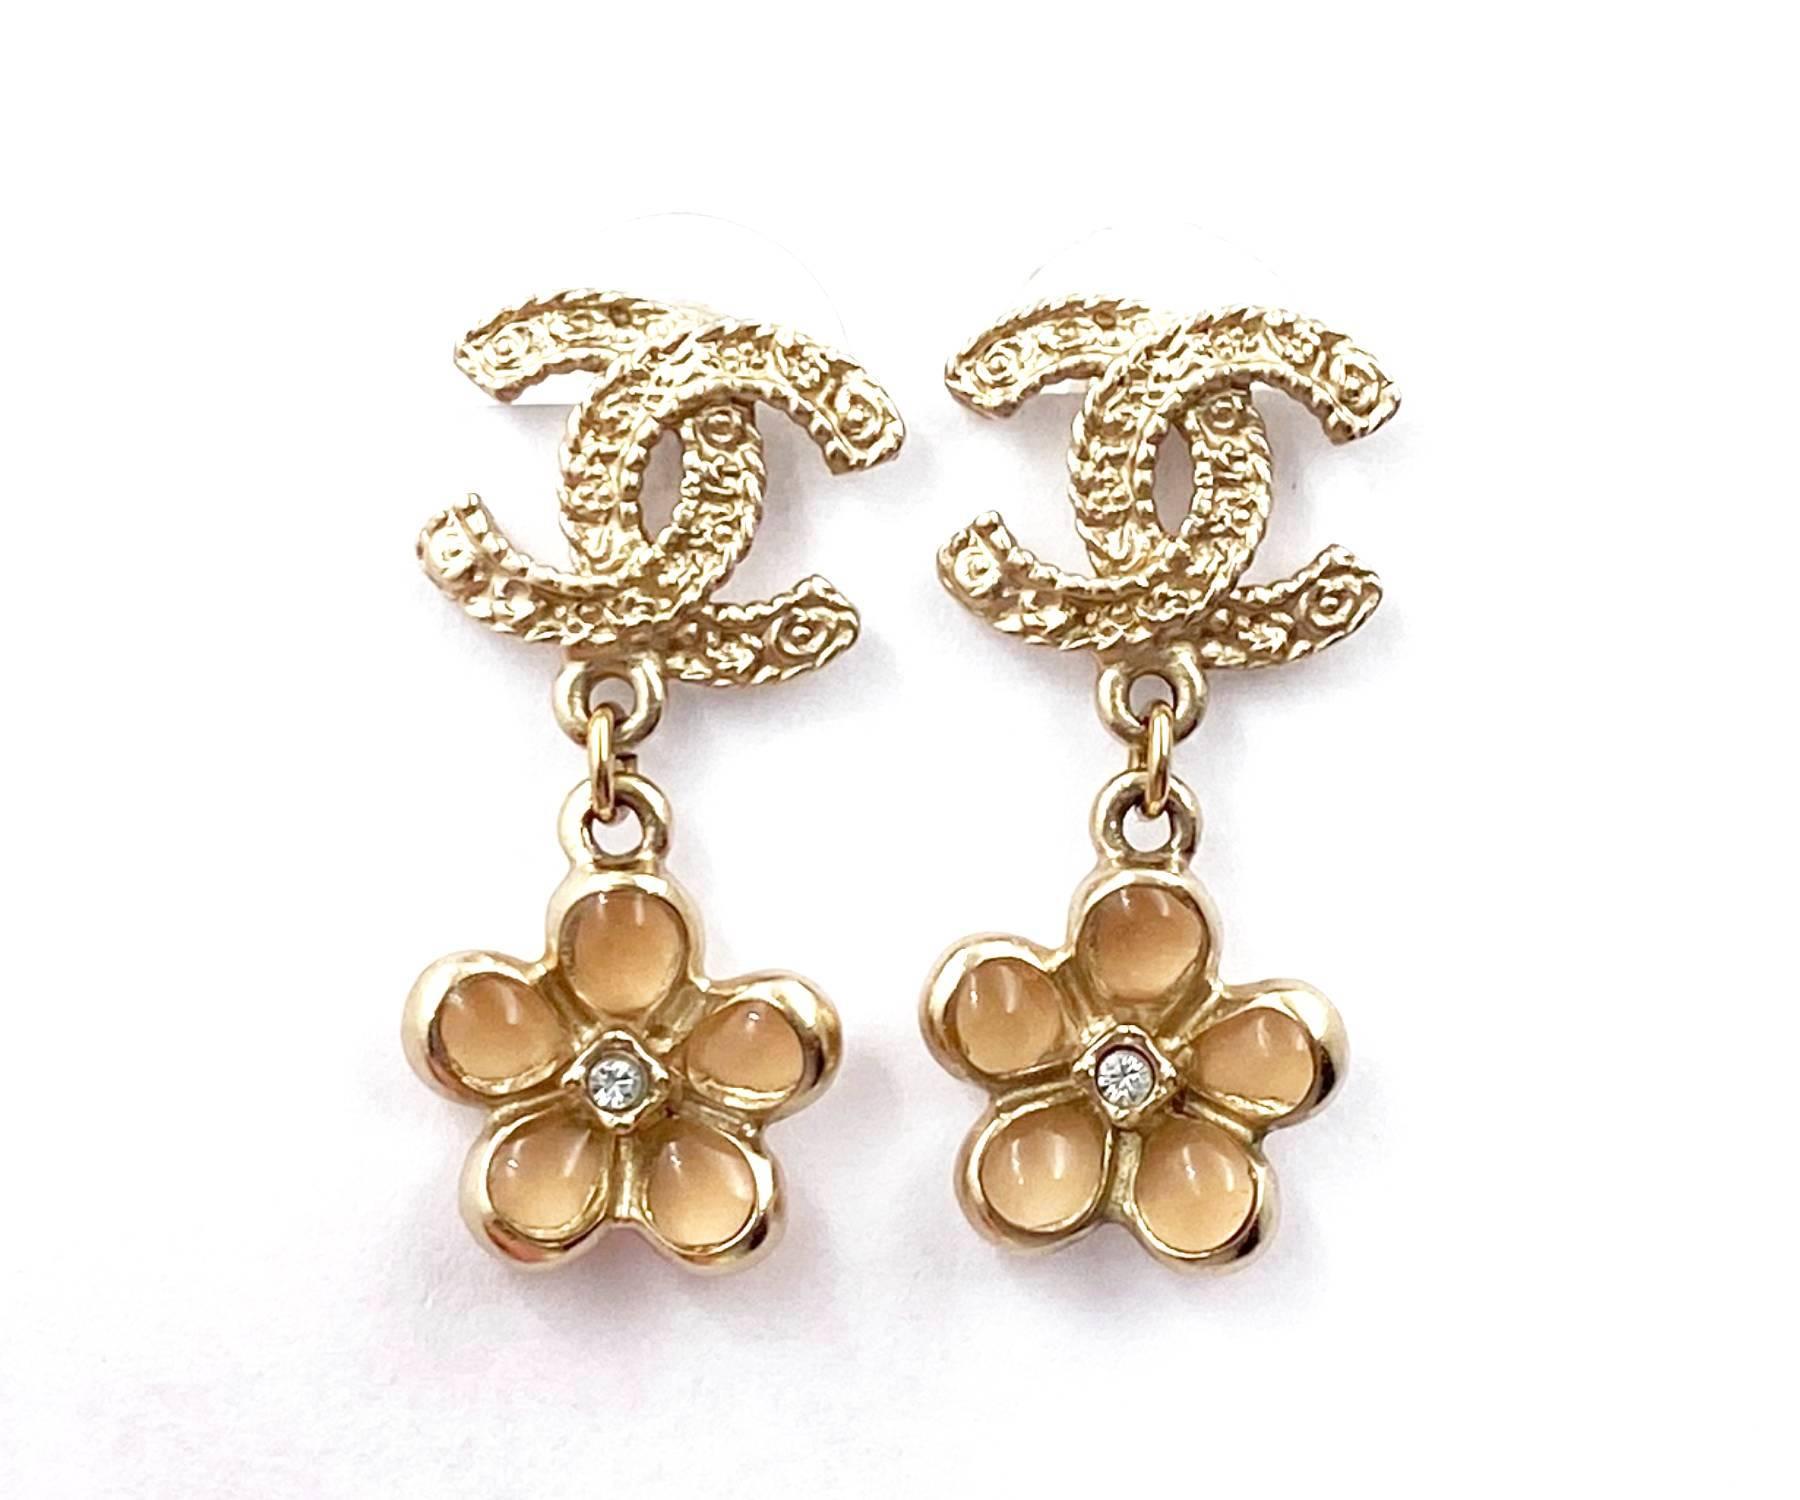 Chanel Gold Filigree CC Pink Flower Dangle Piercing Earrings

* Marked 18
* Made in France
* Comes with original box

-Approximately 1.25